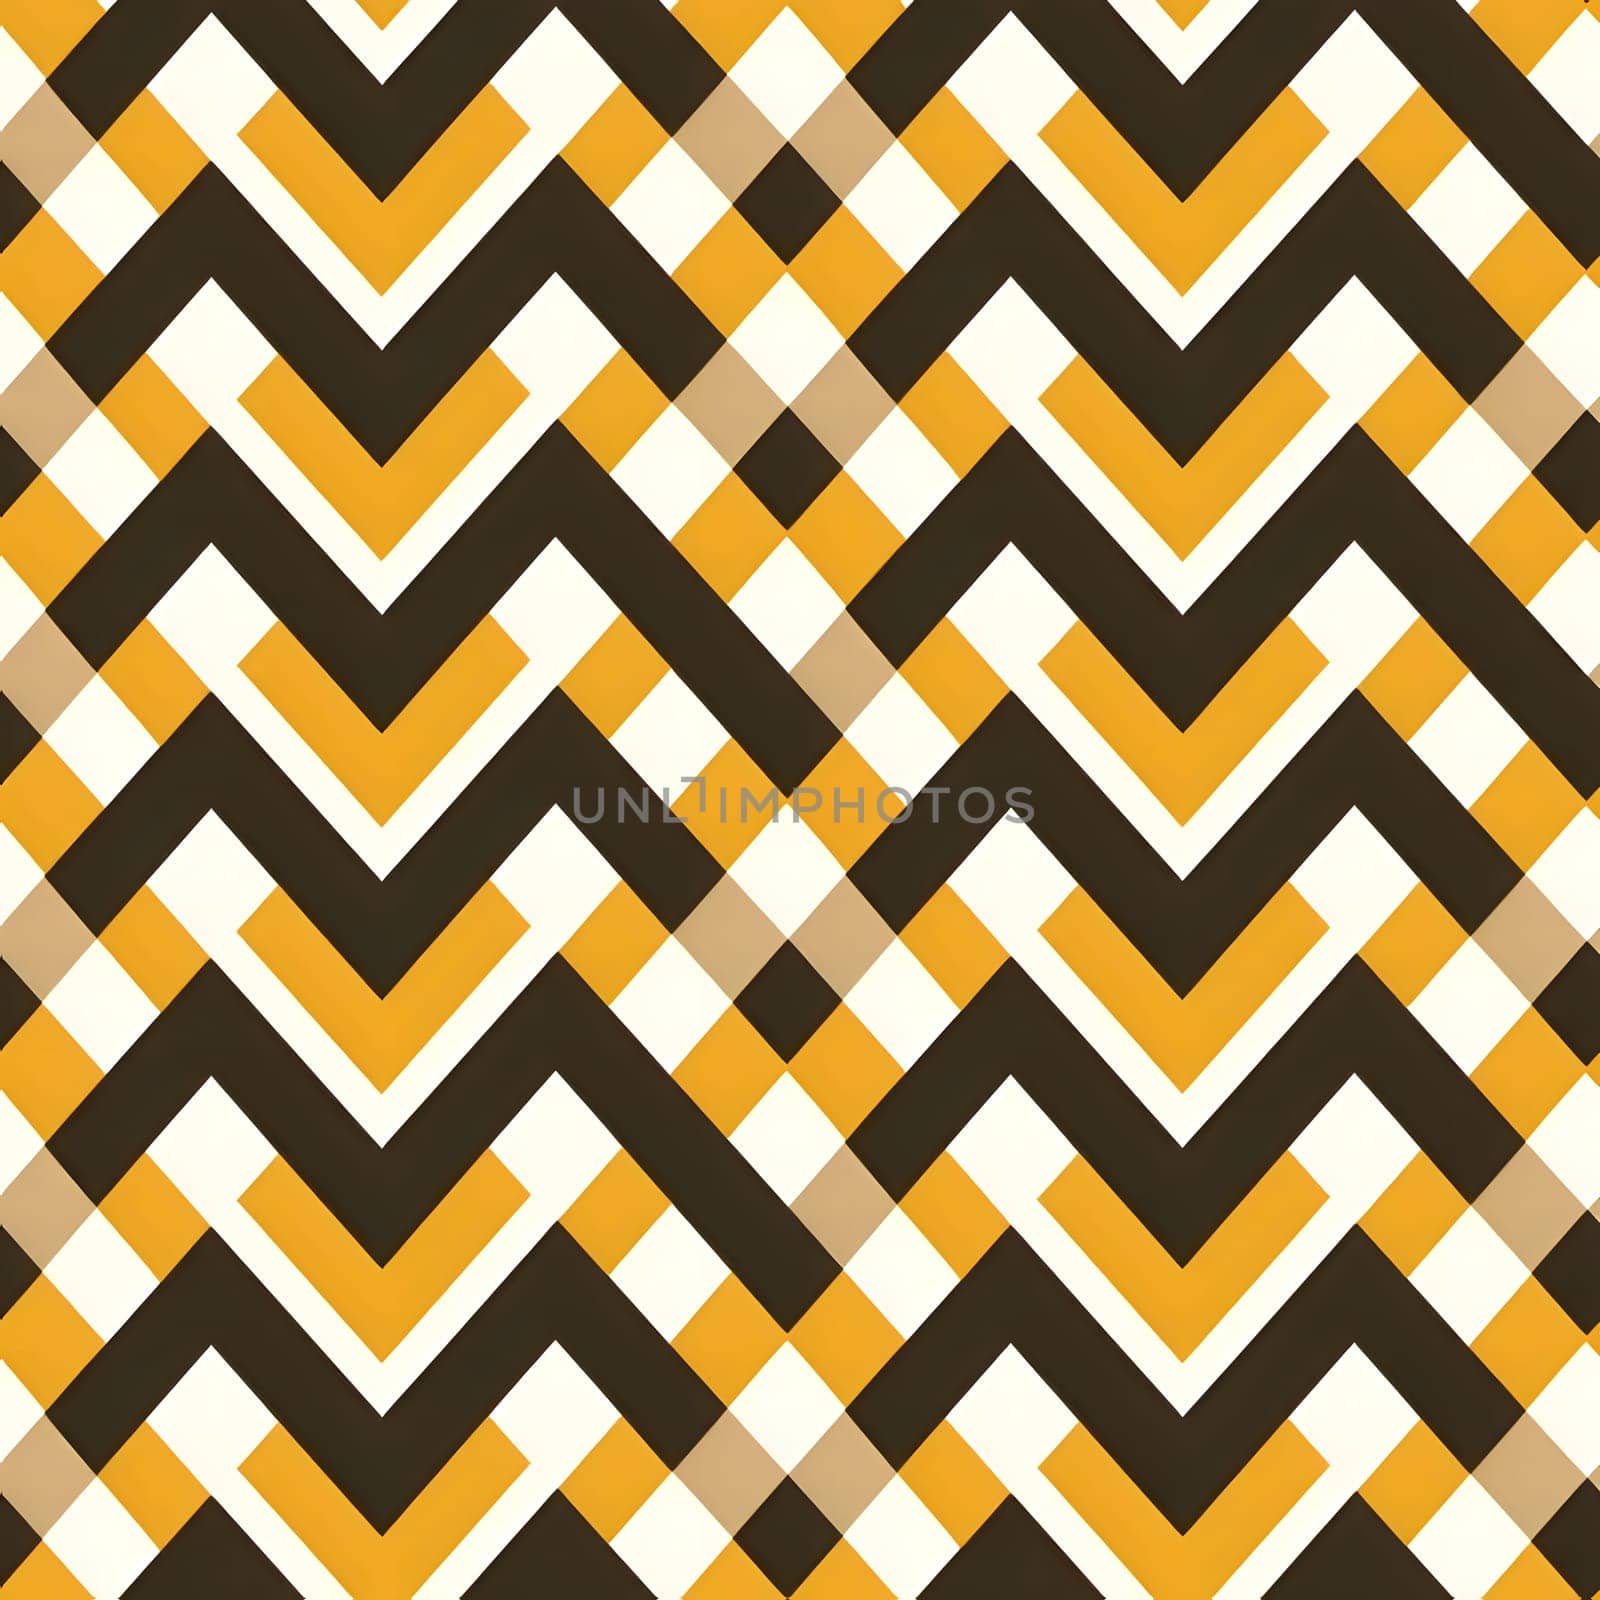 Patterns and banners backgrounds: Seamless pattern with rhombus in yellow and brown colors